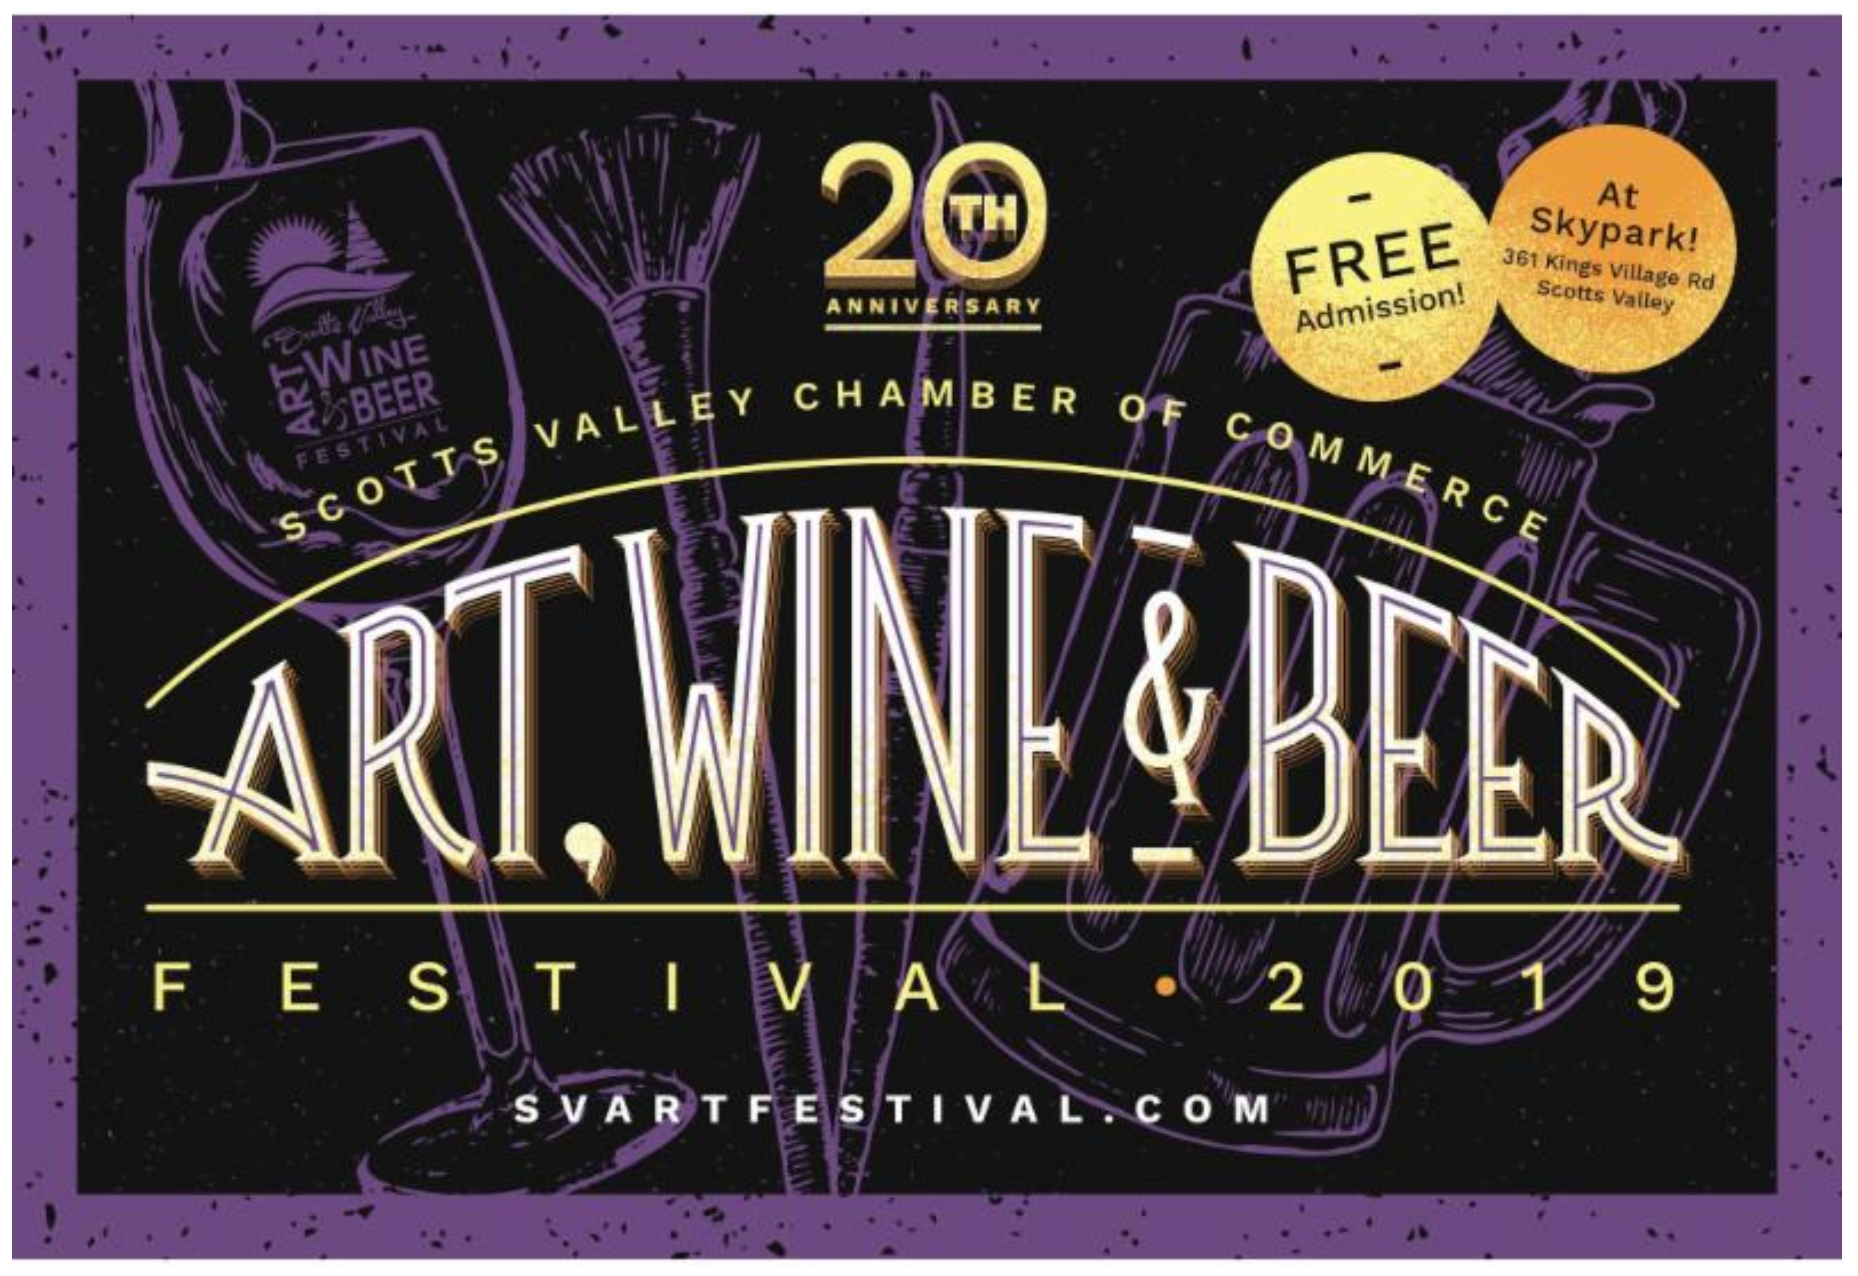 The 20th Scotts Valley Art, Wine and Beer Festival at Skypark My